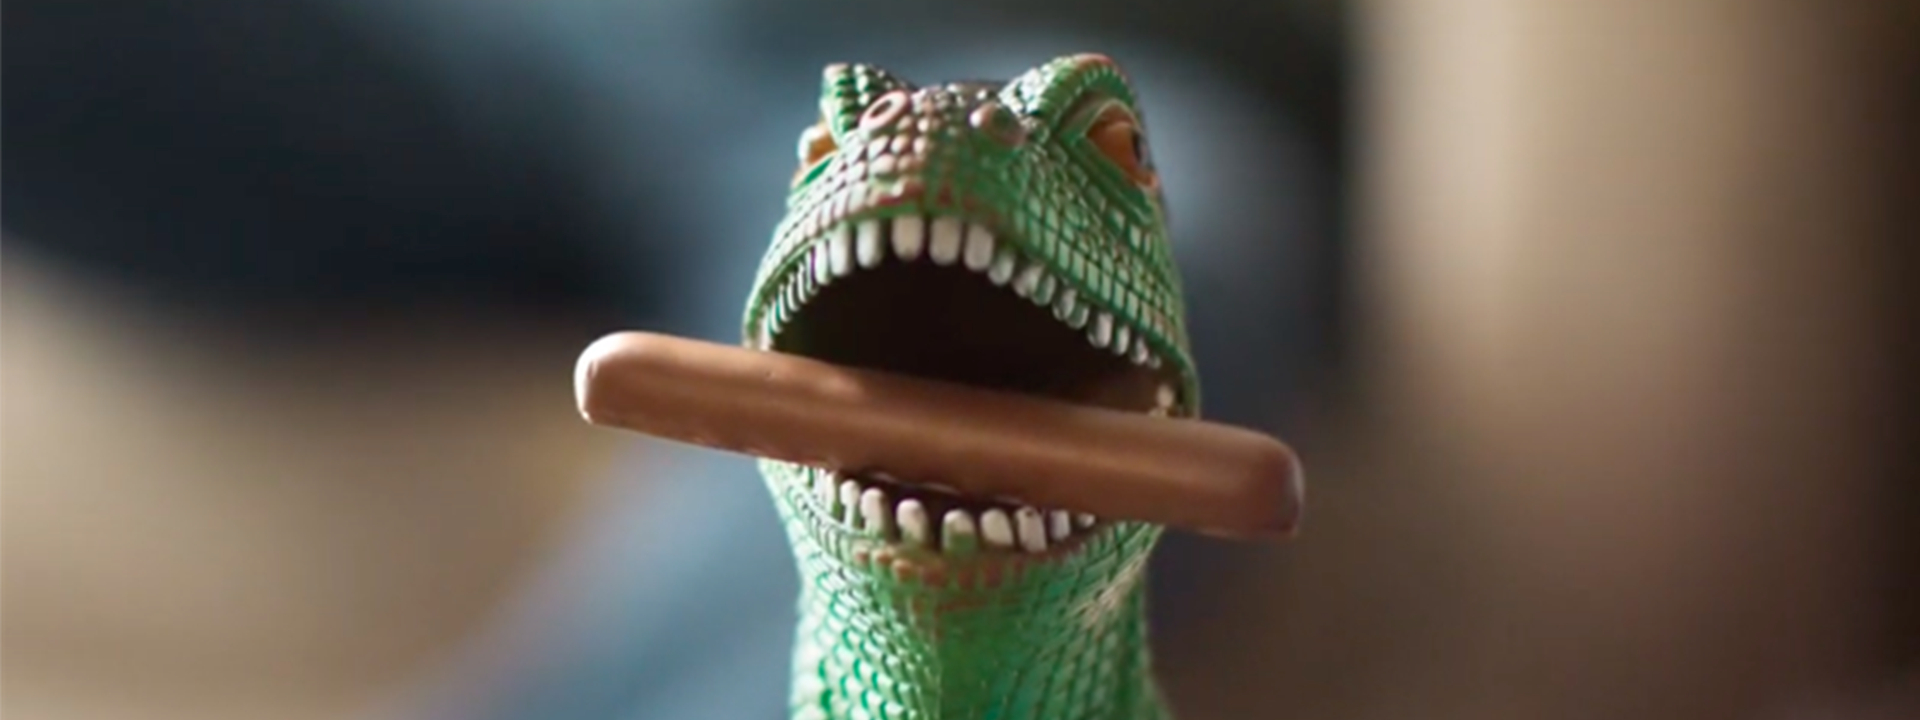 A toy dinosaur with a Cadbury Dairy Milk Finger biscuit in its mouth